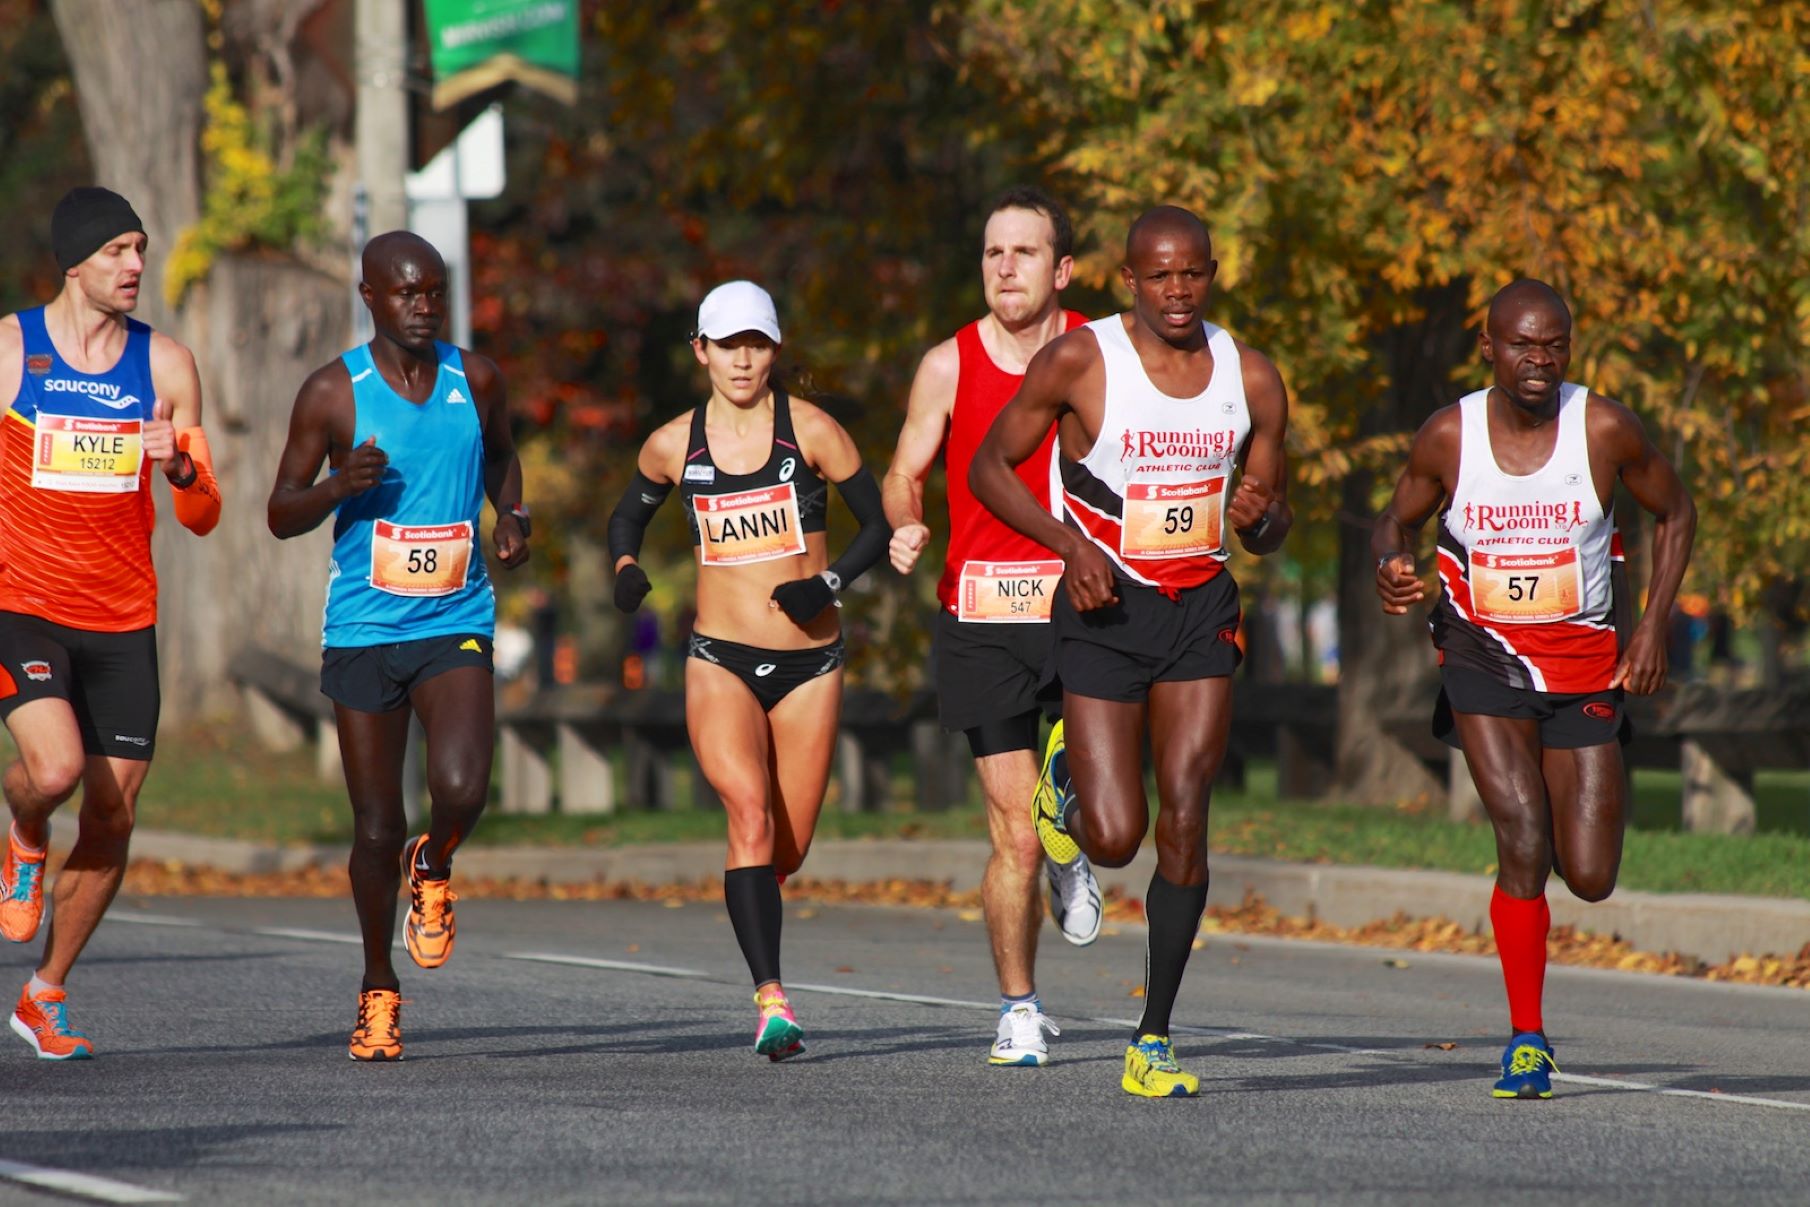 Breaking Records: The Fastest Marathon Times For Men And Women